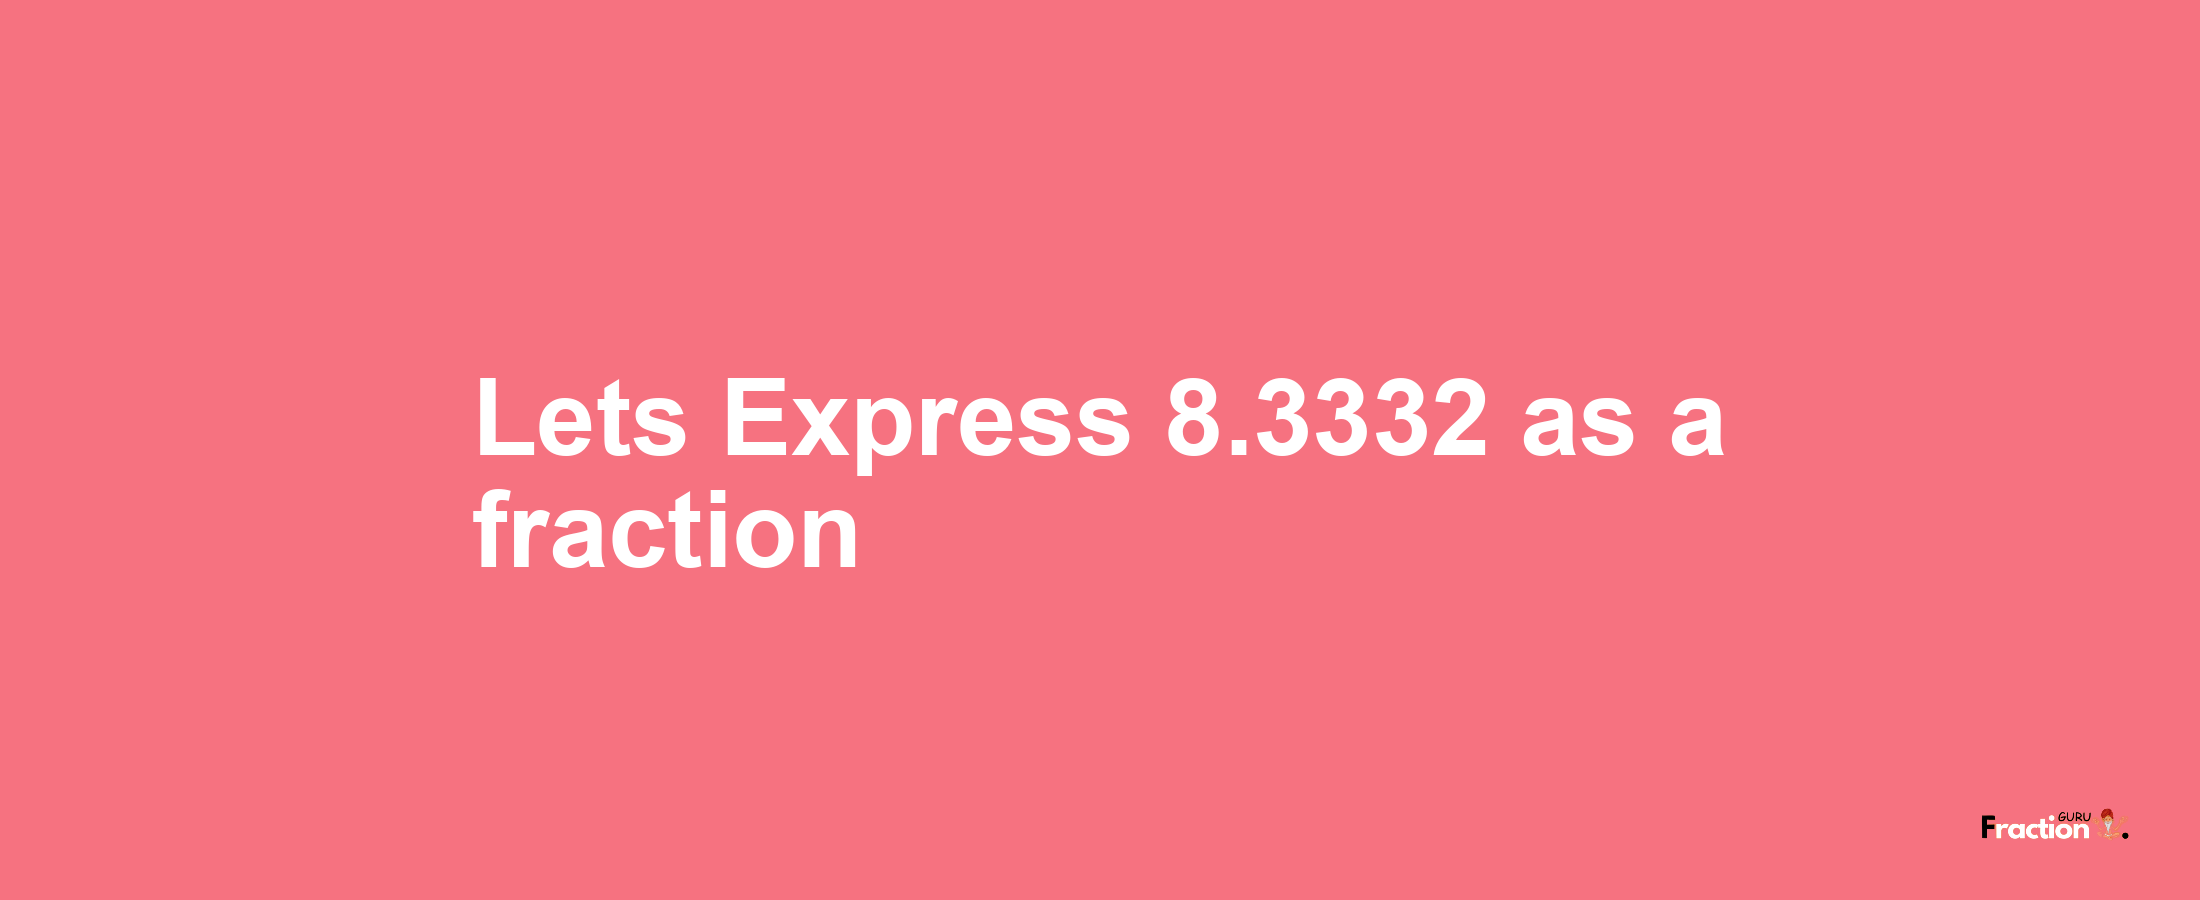 Lets Express 8.3332 as afraction